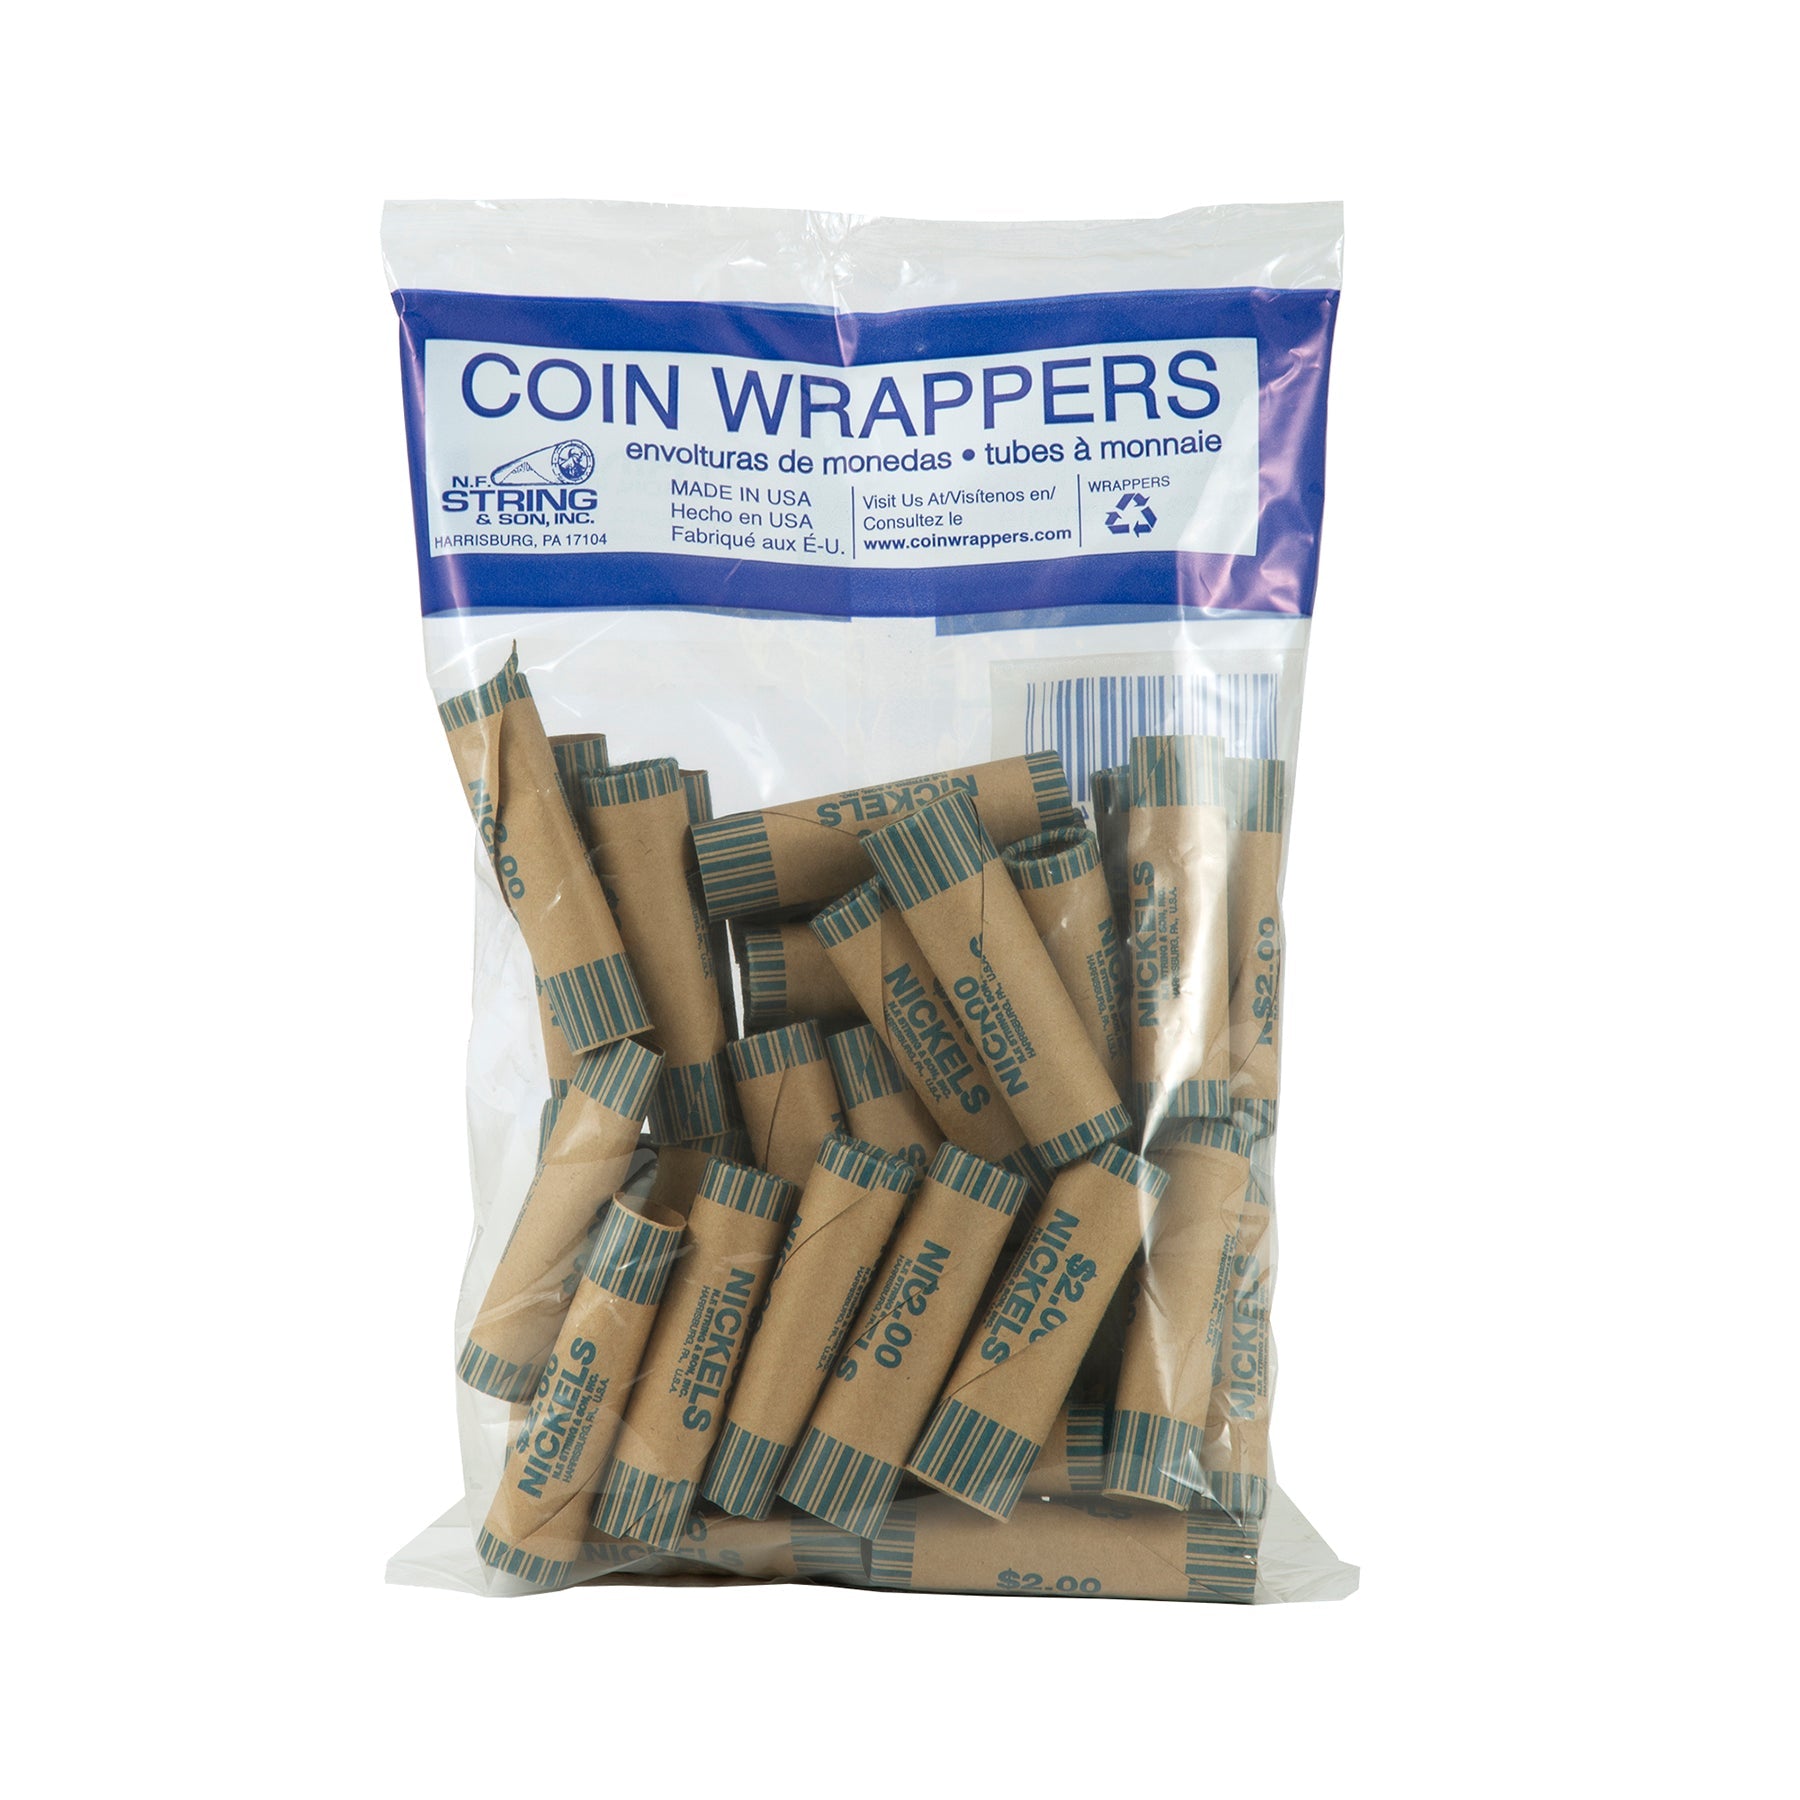 N.F. String 36 Paper Coin Wrappers $0.05